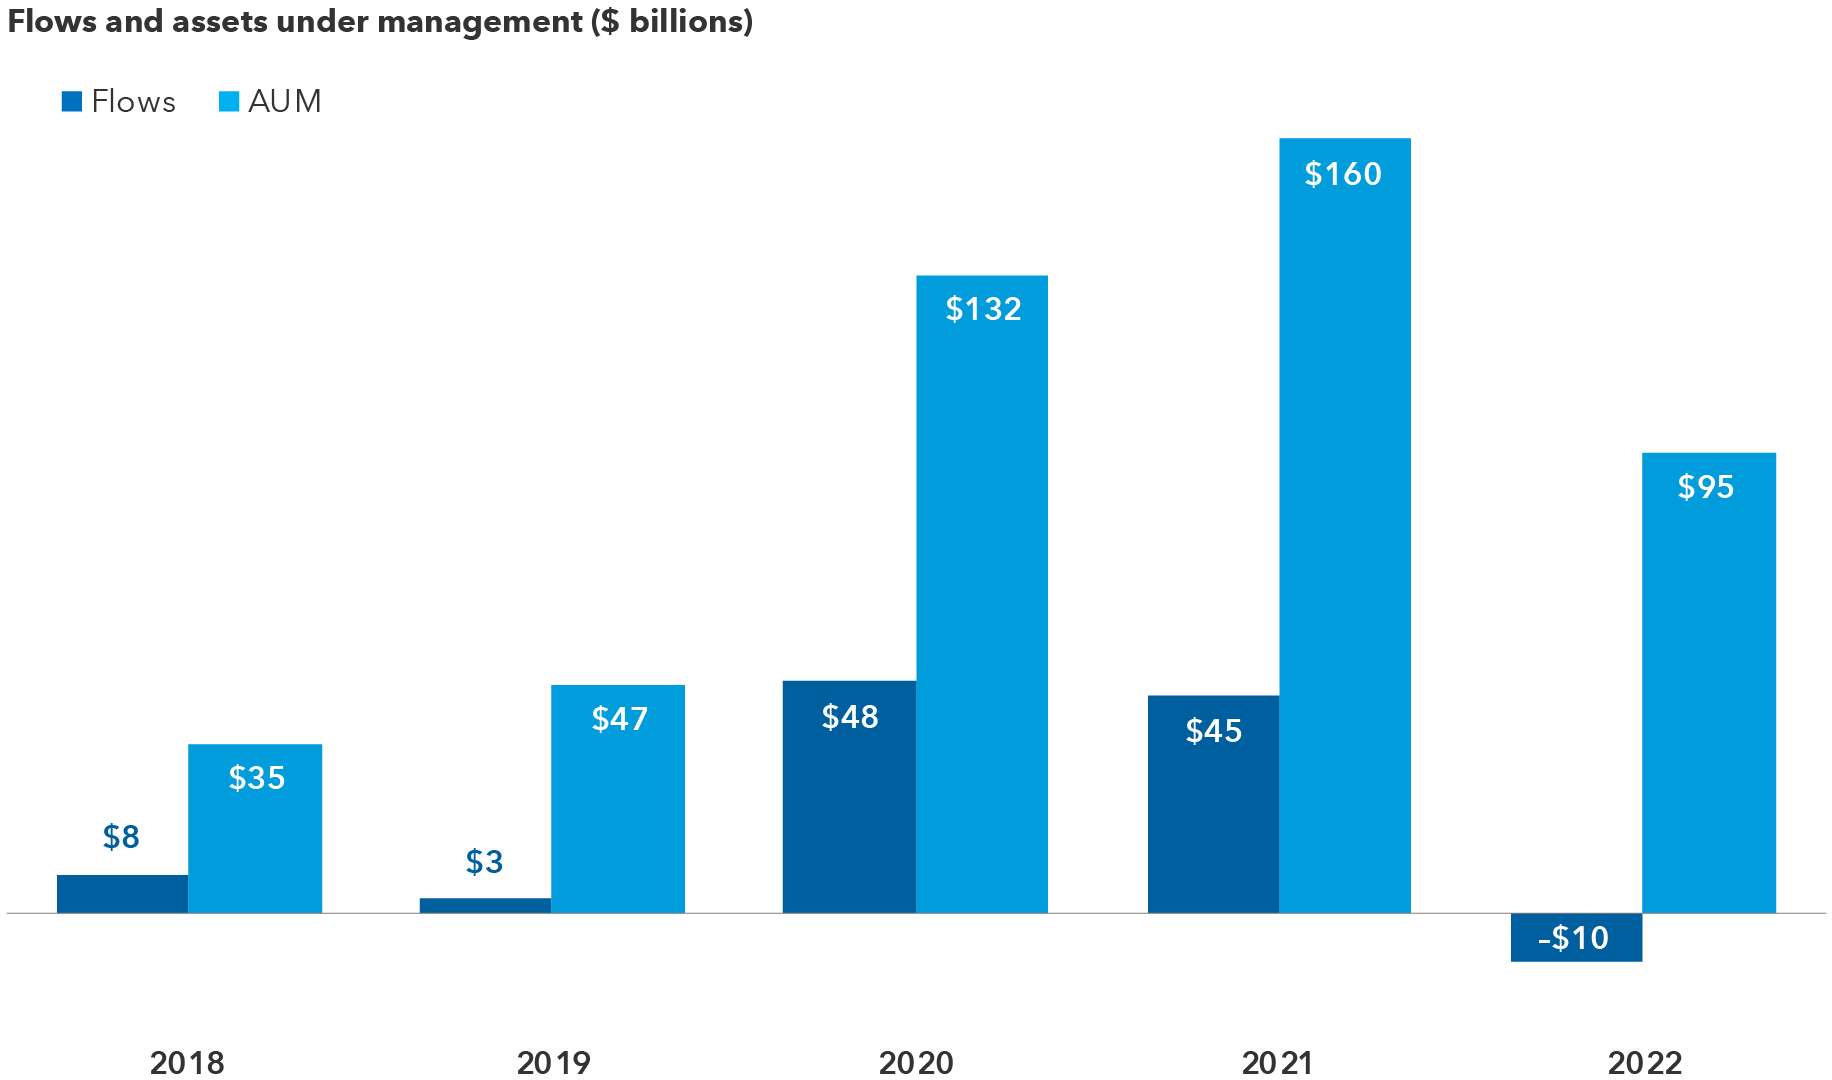 A bar chart showing annual U.S. thematic ETF flows and assets under management (AUM) from 2018 to 2022. In 2018, thematic ETFs had inflows of $8 billion, which helped drive AUM to $35 billion. In 2019, thematic ETFs had inflows of $3 billion as AUM rose to $47 billion. In 2020, thematic ETFs had inflows of $48 billion as AUM rose to $132 billion. In 2021, thematic ETFs had inflows of $45 billion as AUM rose to $160 billion. In 2022, thematic ETFs had outflows of $10 billion as AUM fell to $95 billion.